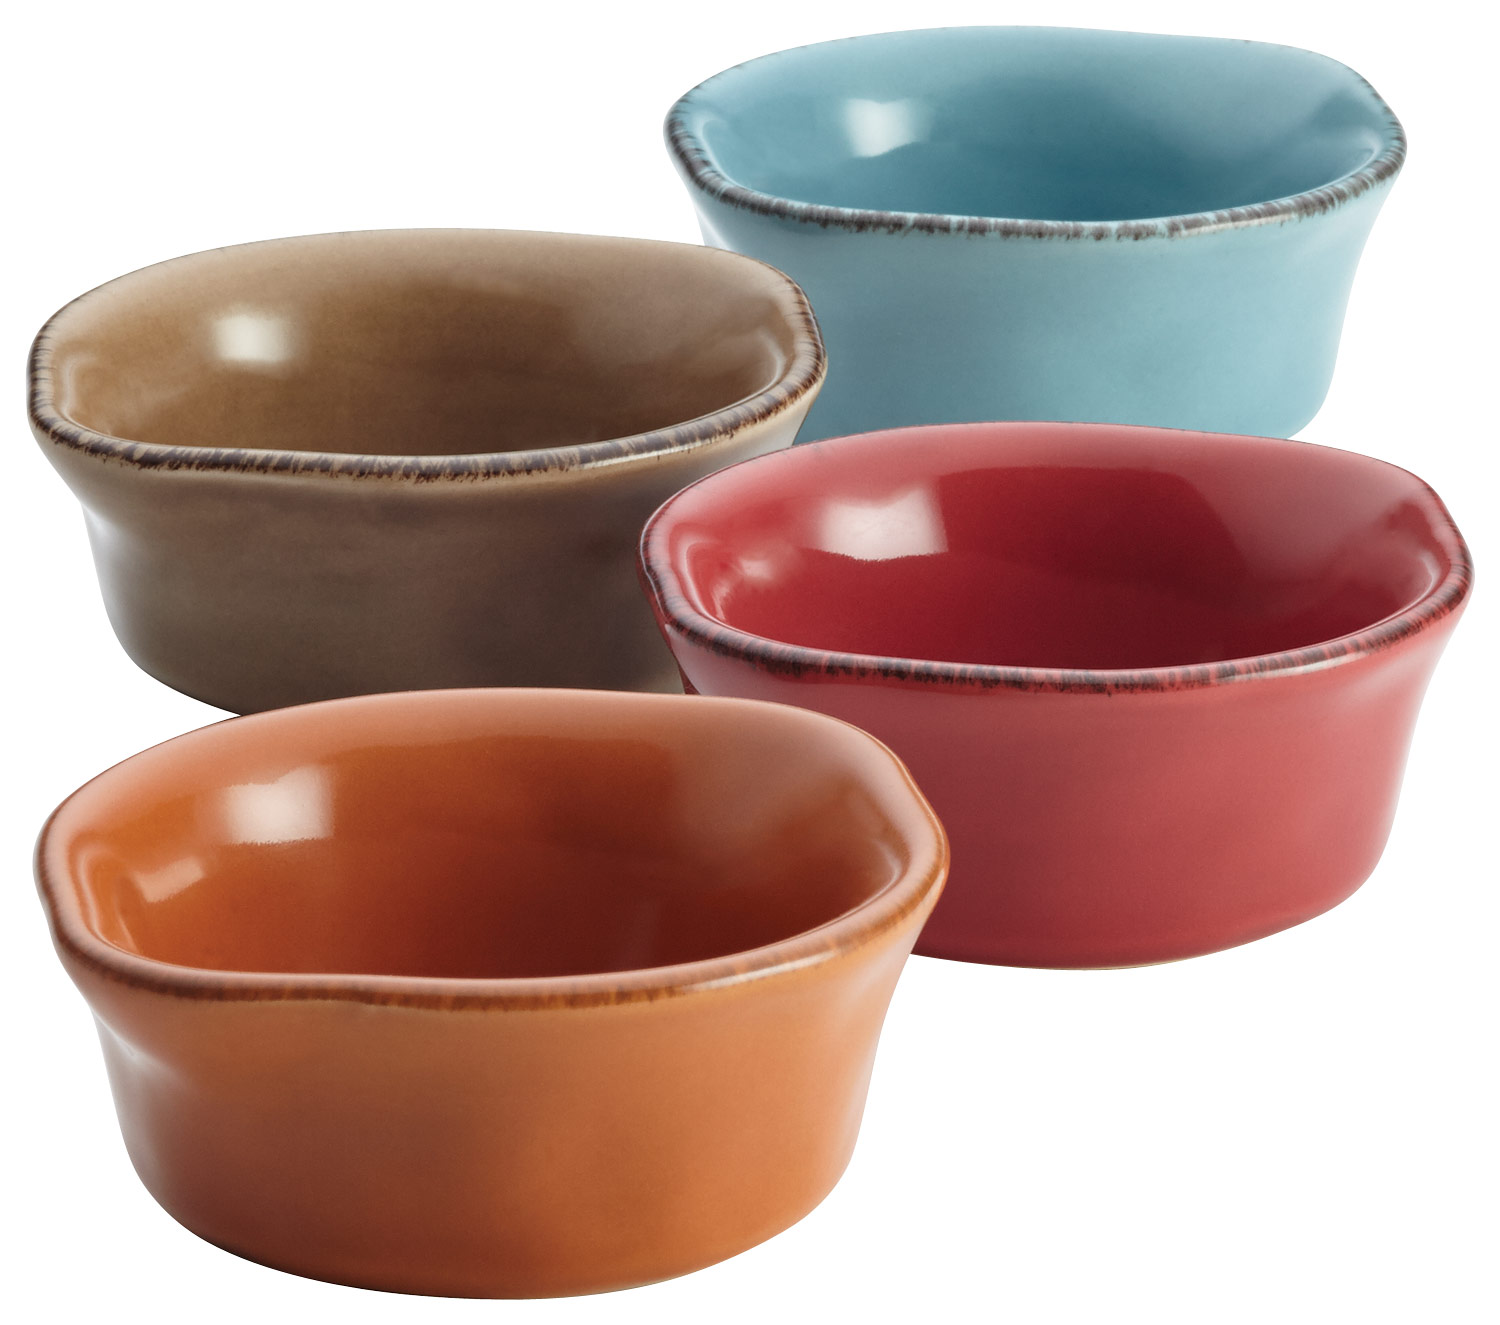  Rachael Ray - Cucina 4-Piece Dipping Cup Set - Brown/Blue/Red/Orange